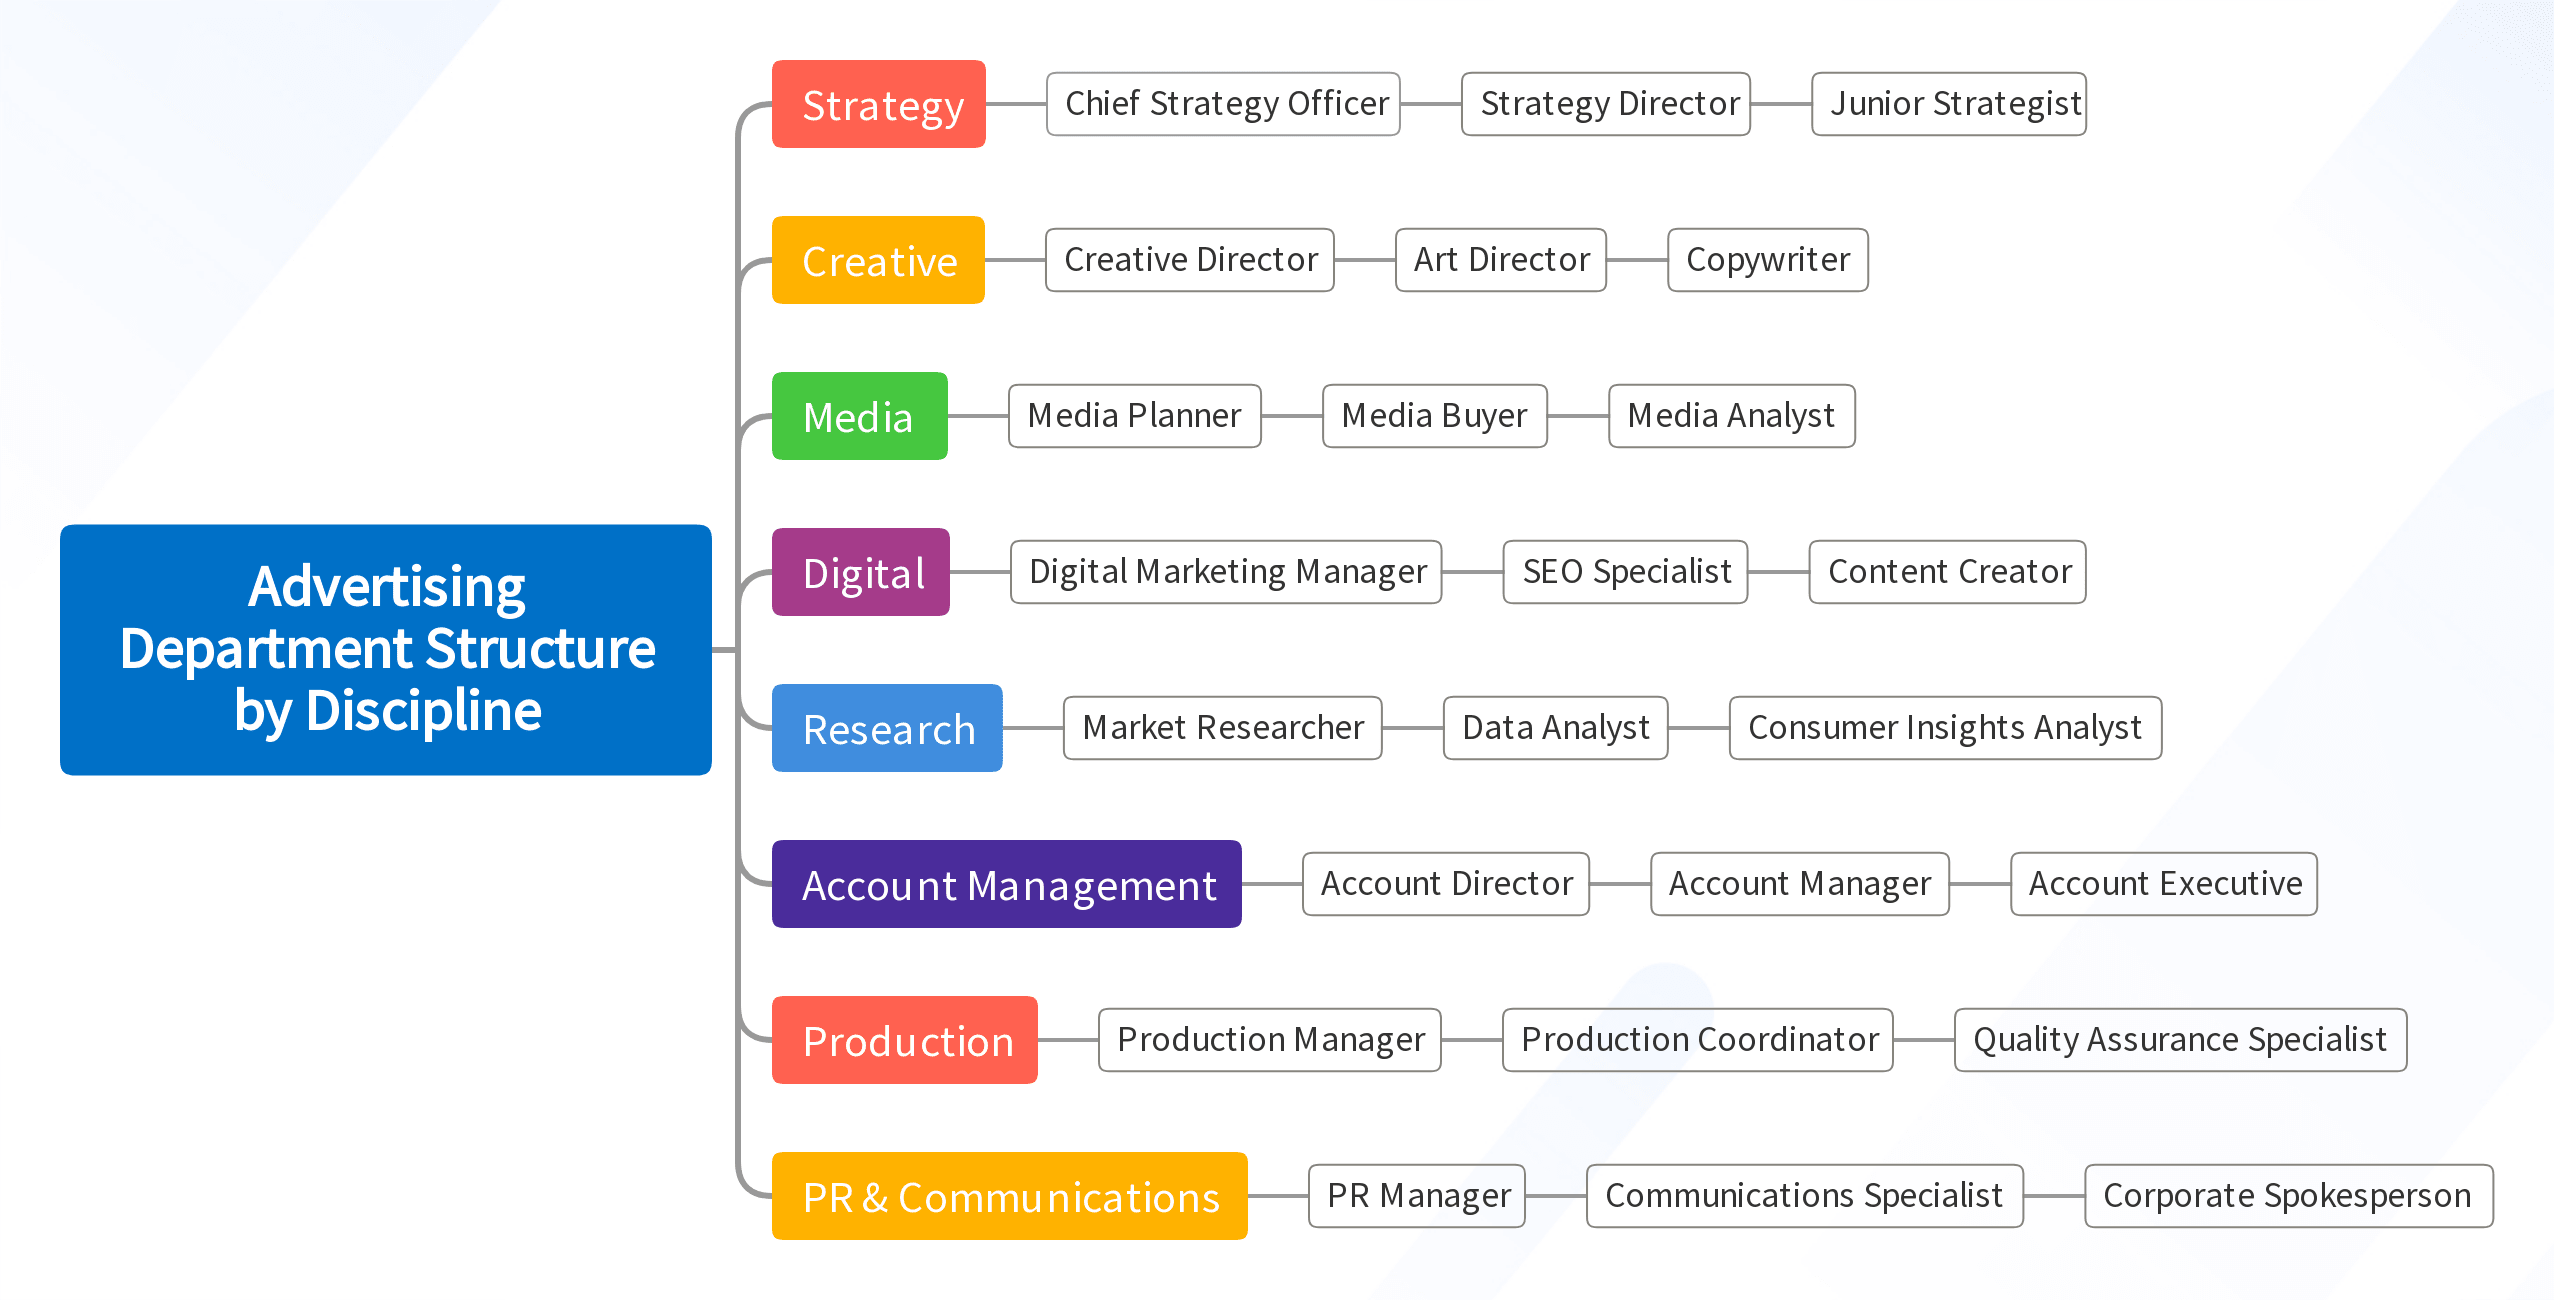 Advertising Department Structure by Discipline